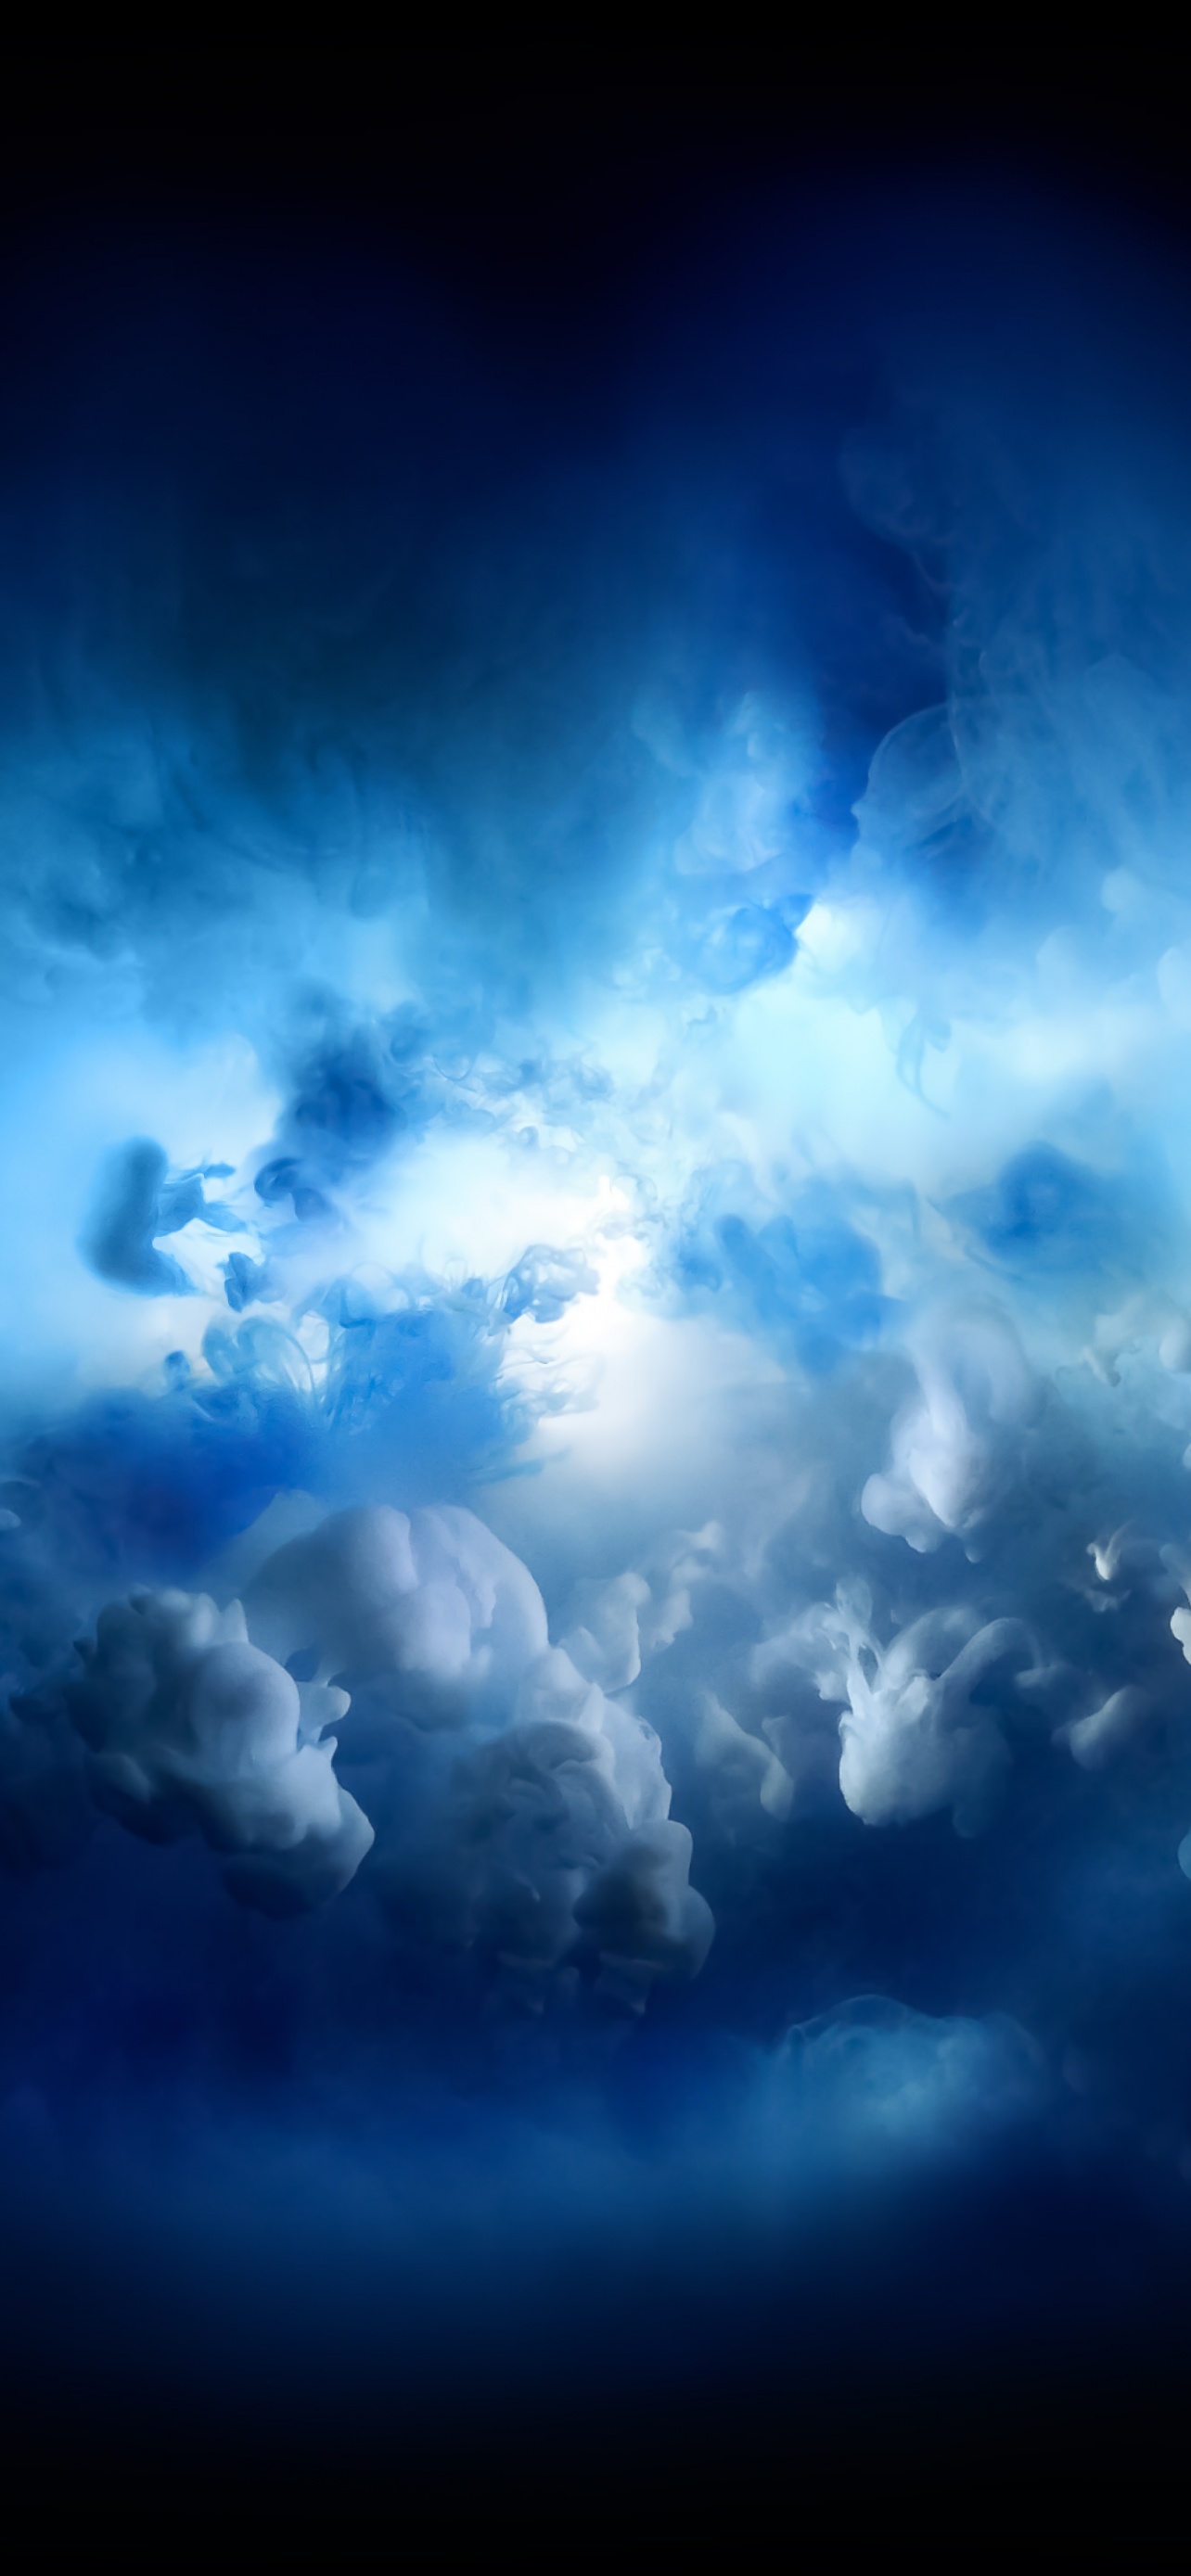 3703700 Blue Clouds Stock Photos Pictures  RoyaltyFree Images   iStock  Sky blue clouds Dark blue clouds Blue clouds background